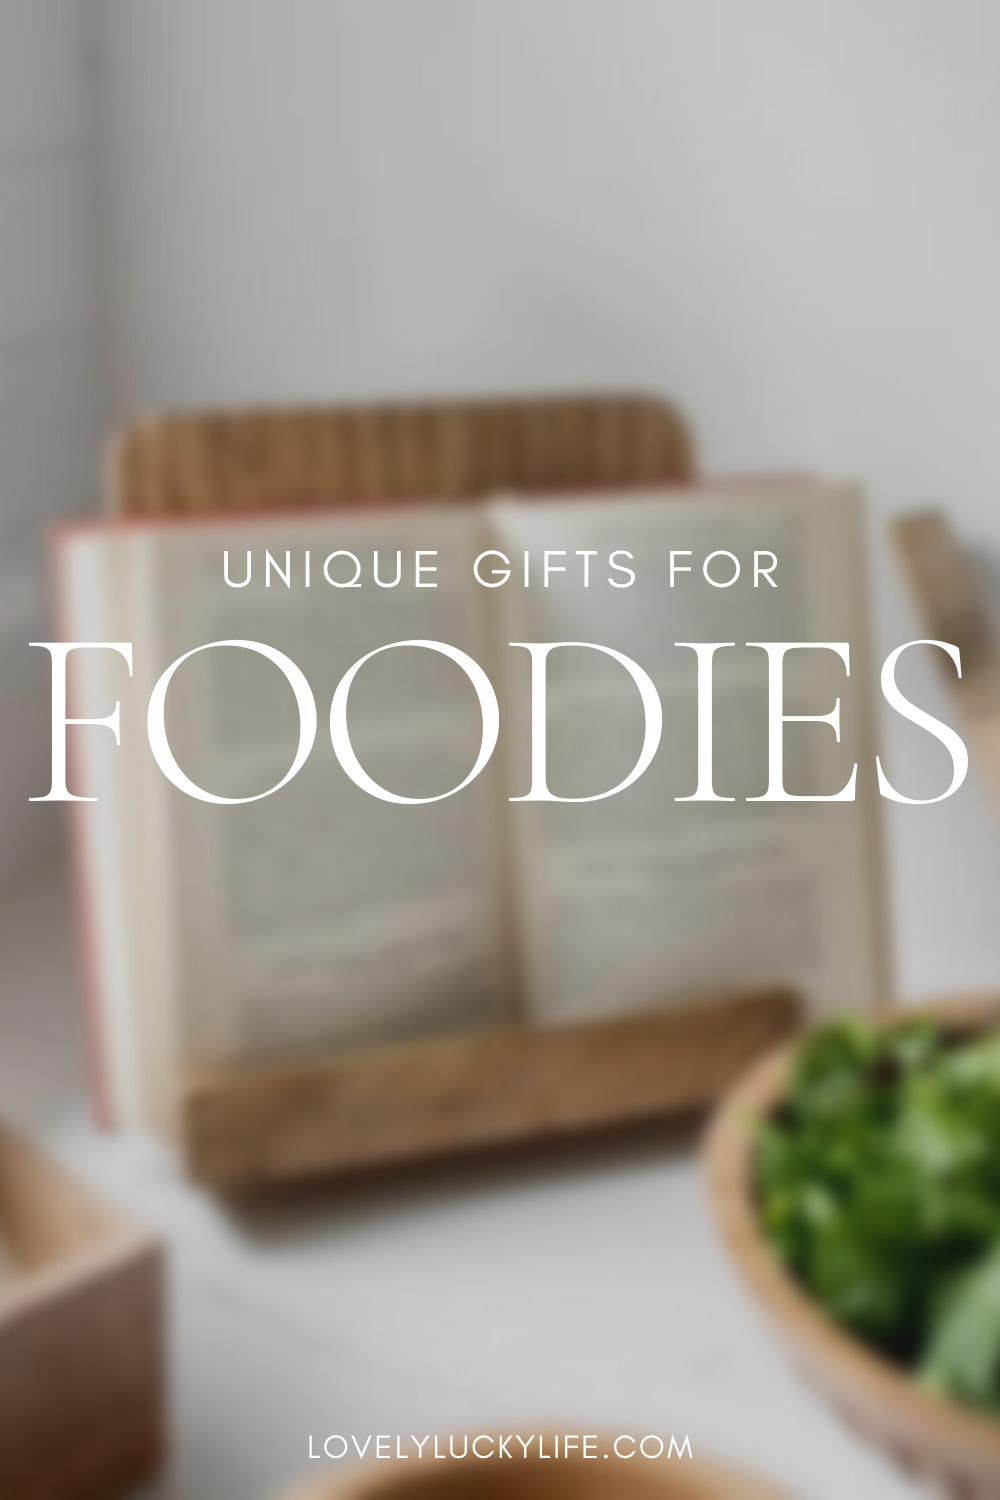 Best Kitchen Gifts for the Foodies in Your life - Suburban Simplicity